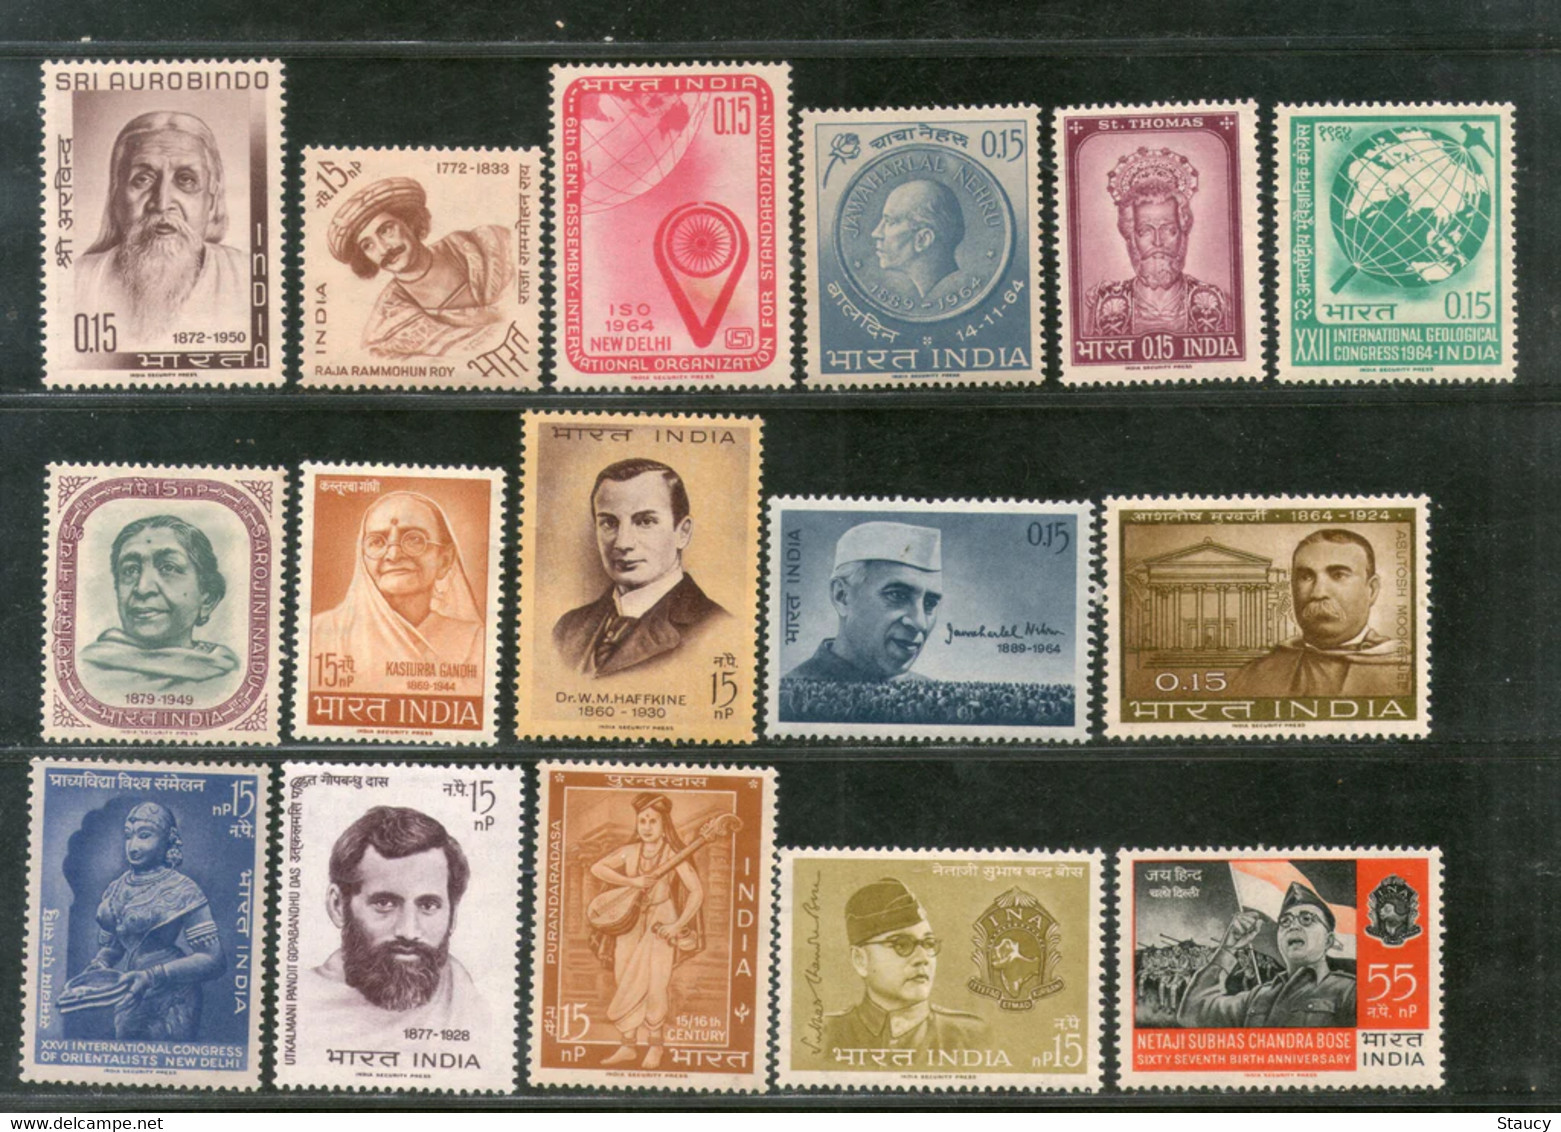 India 1964 Complete Year Pack / Set / Collection Total 16 Stamps (No Missing) MNH As Per Scan - Neufs